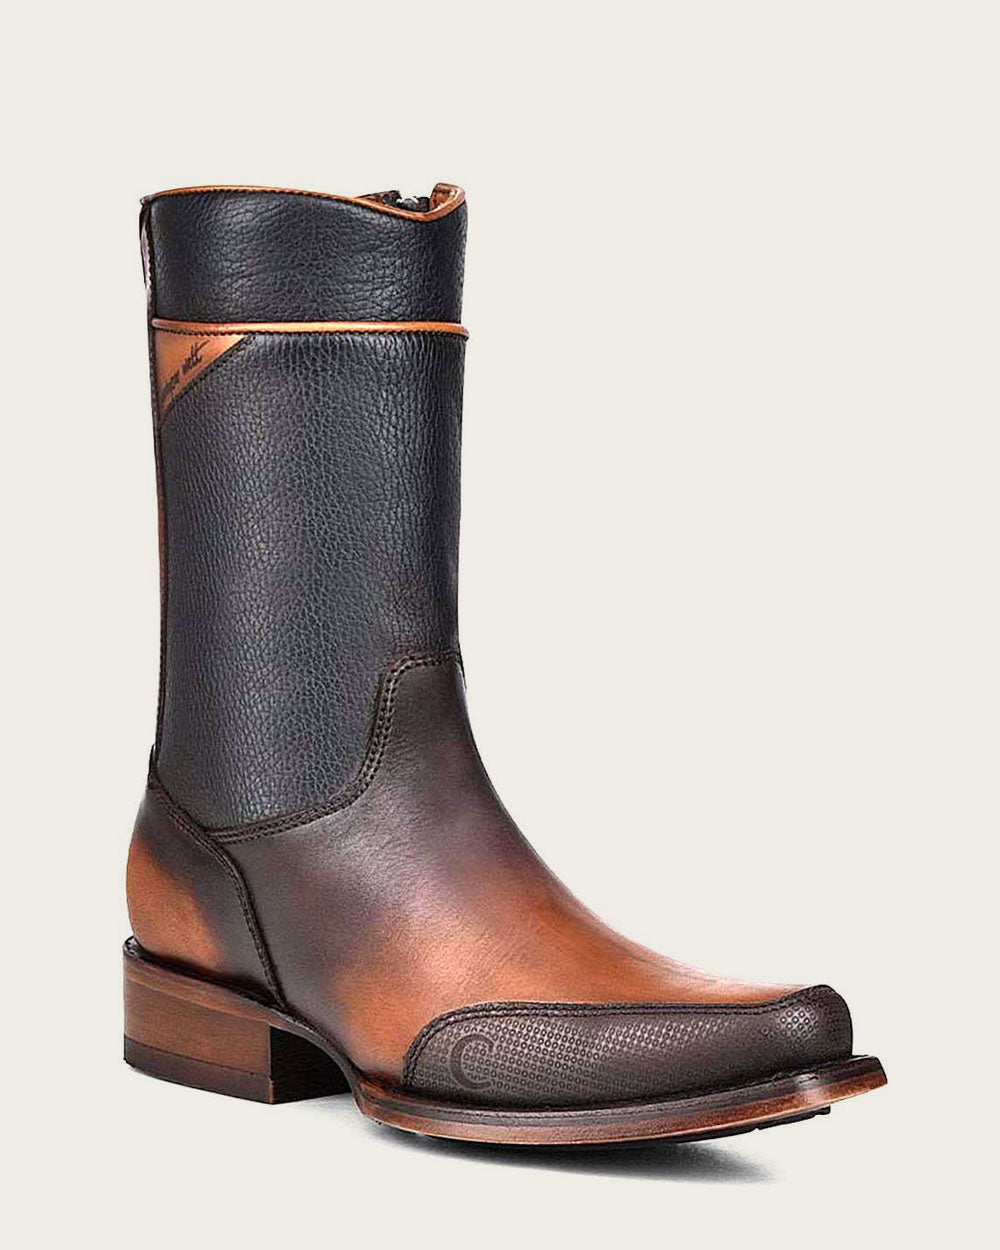 Brown Hand-painted engraved dress boots